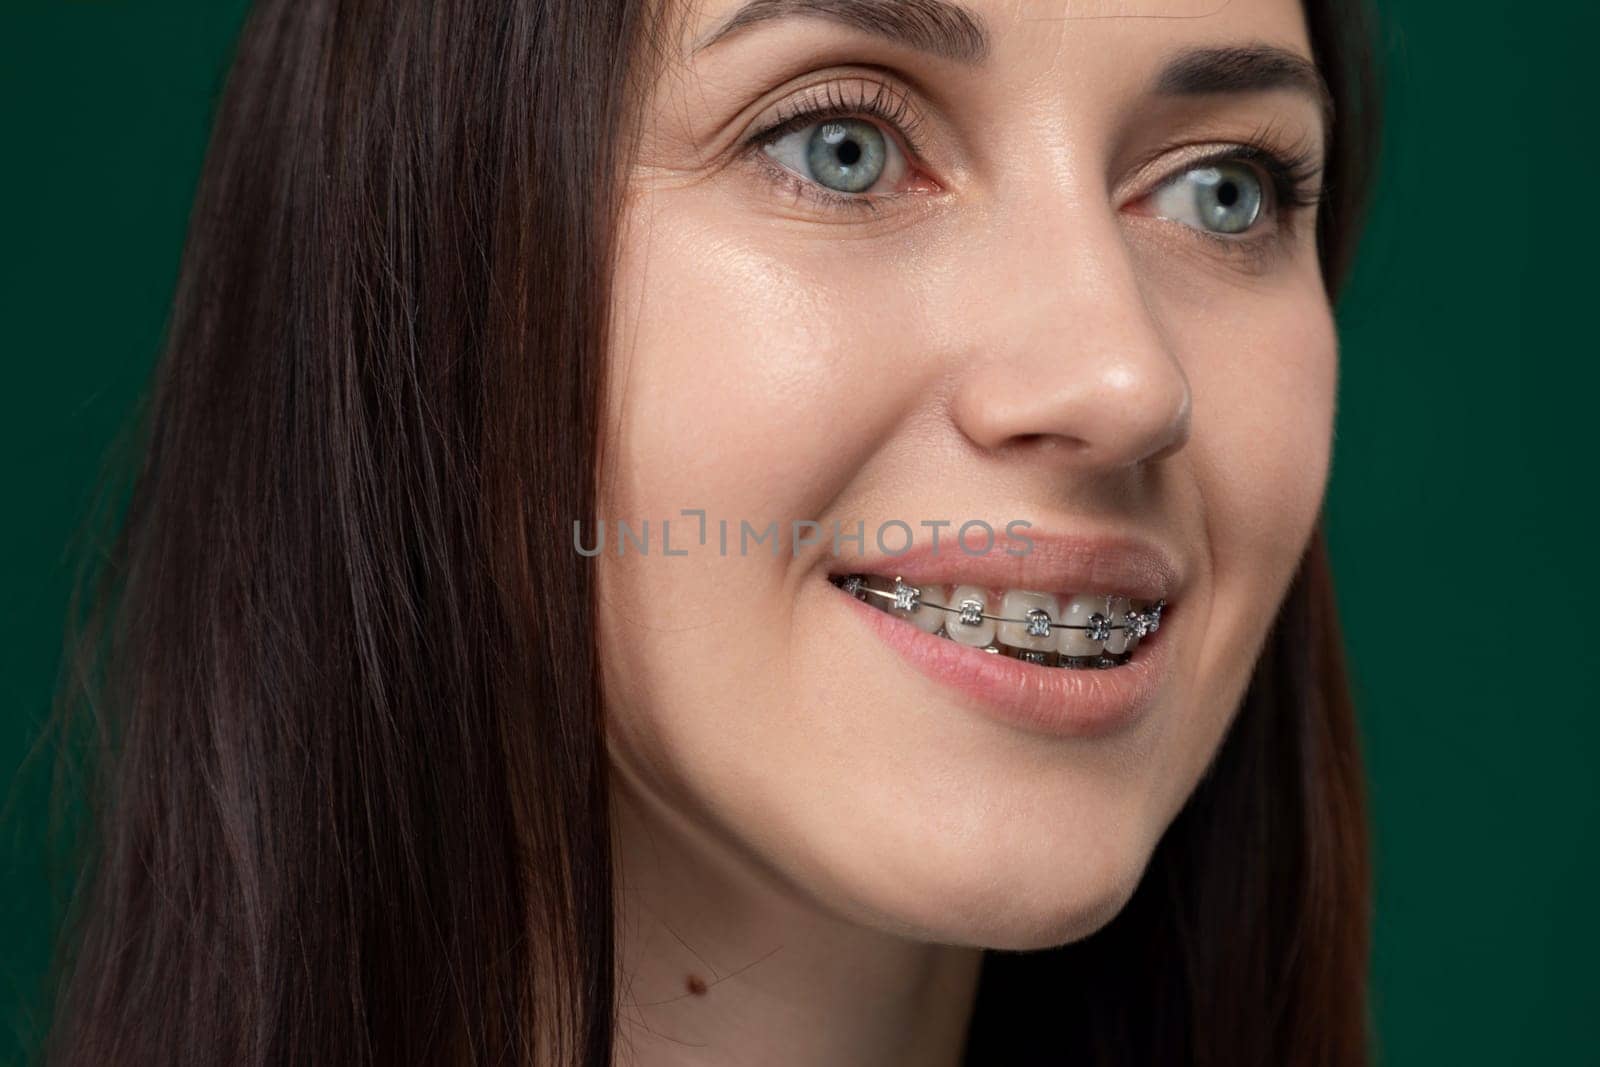 A woman with braces on her teeth smiling cheerfully, displaying her orthodontic treatment. Her teeth are noticeably straighter and aligned, showcasing the effectiveness of braces in improving dental alignment and aesthetics.